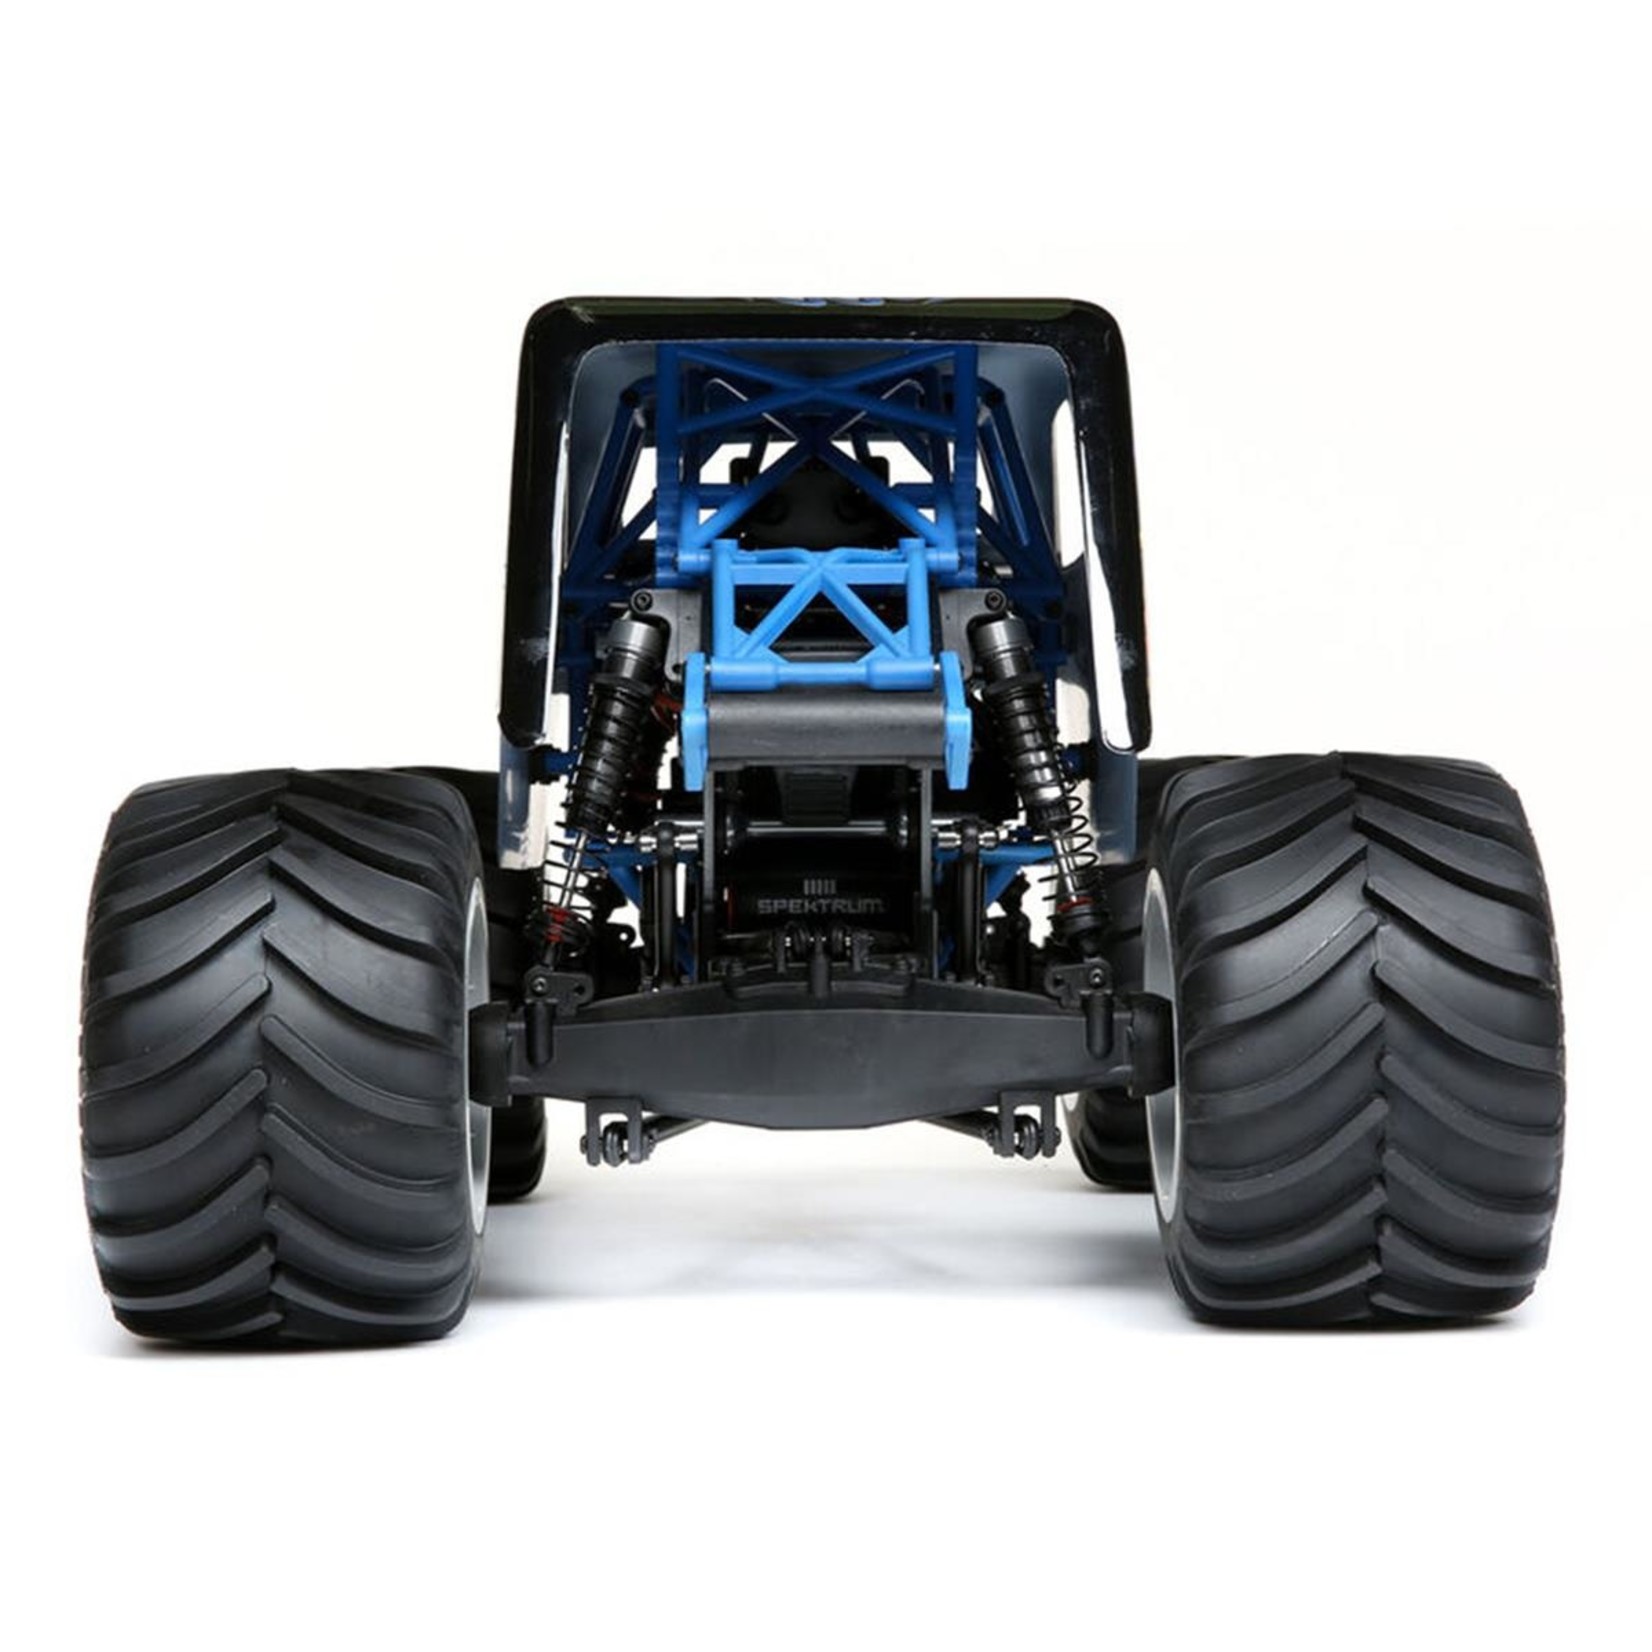 Losi Losi LMT Son Uva Digger RTR 1/10 4WD Solid Axle Monster Truck w/DX3 2.4GHz Radio #LOS04021T2